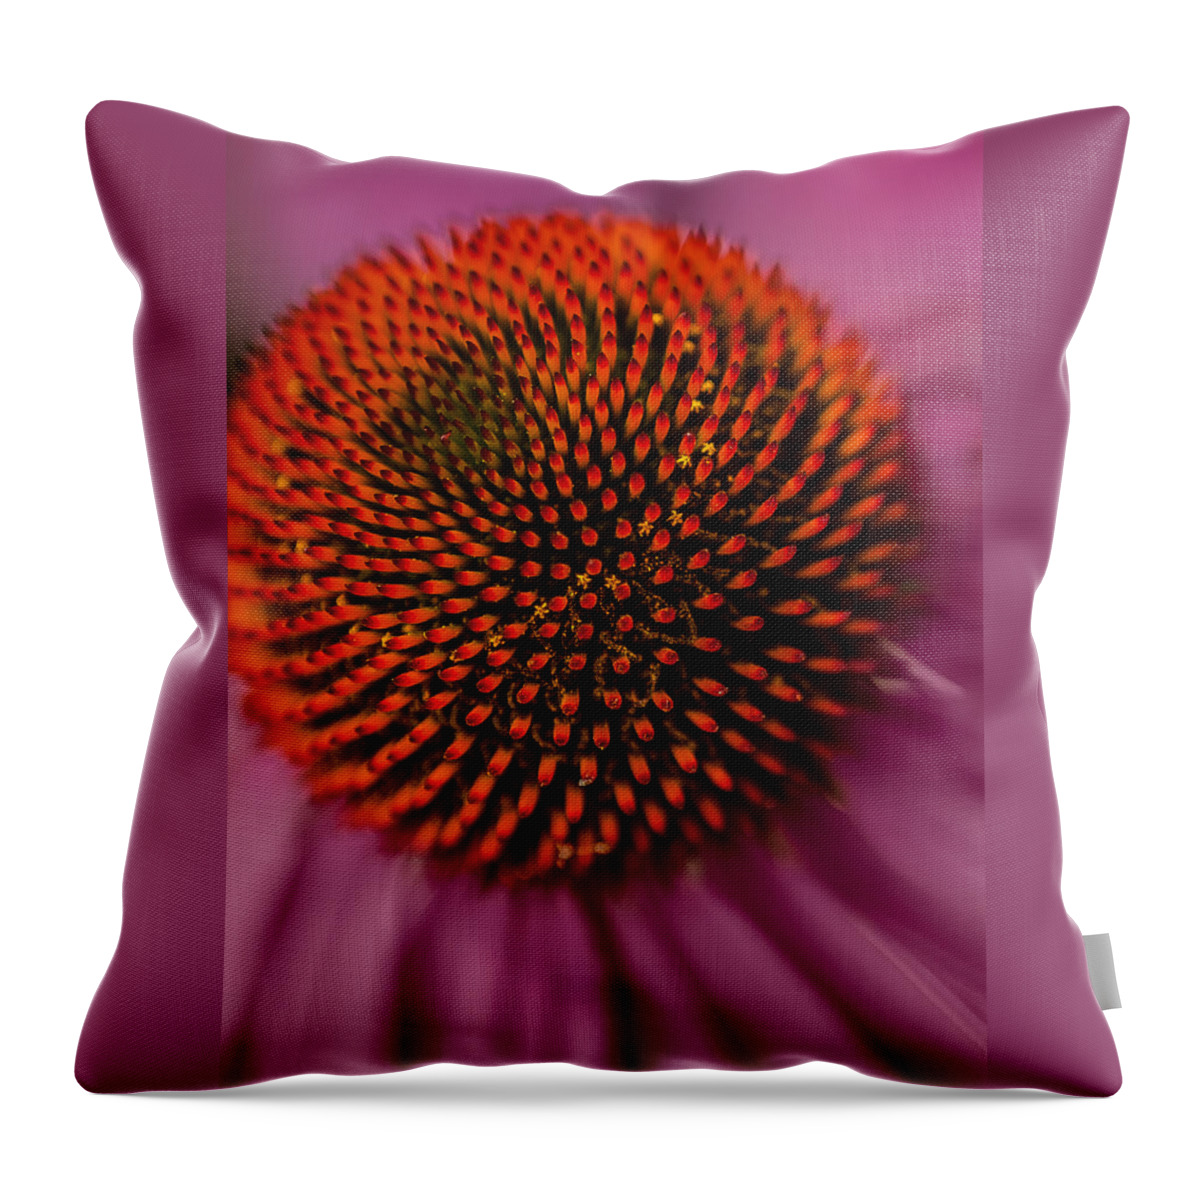 Close-up Throw Pillow featuring the photograph Purple Coneflower by David Smith